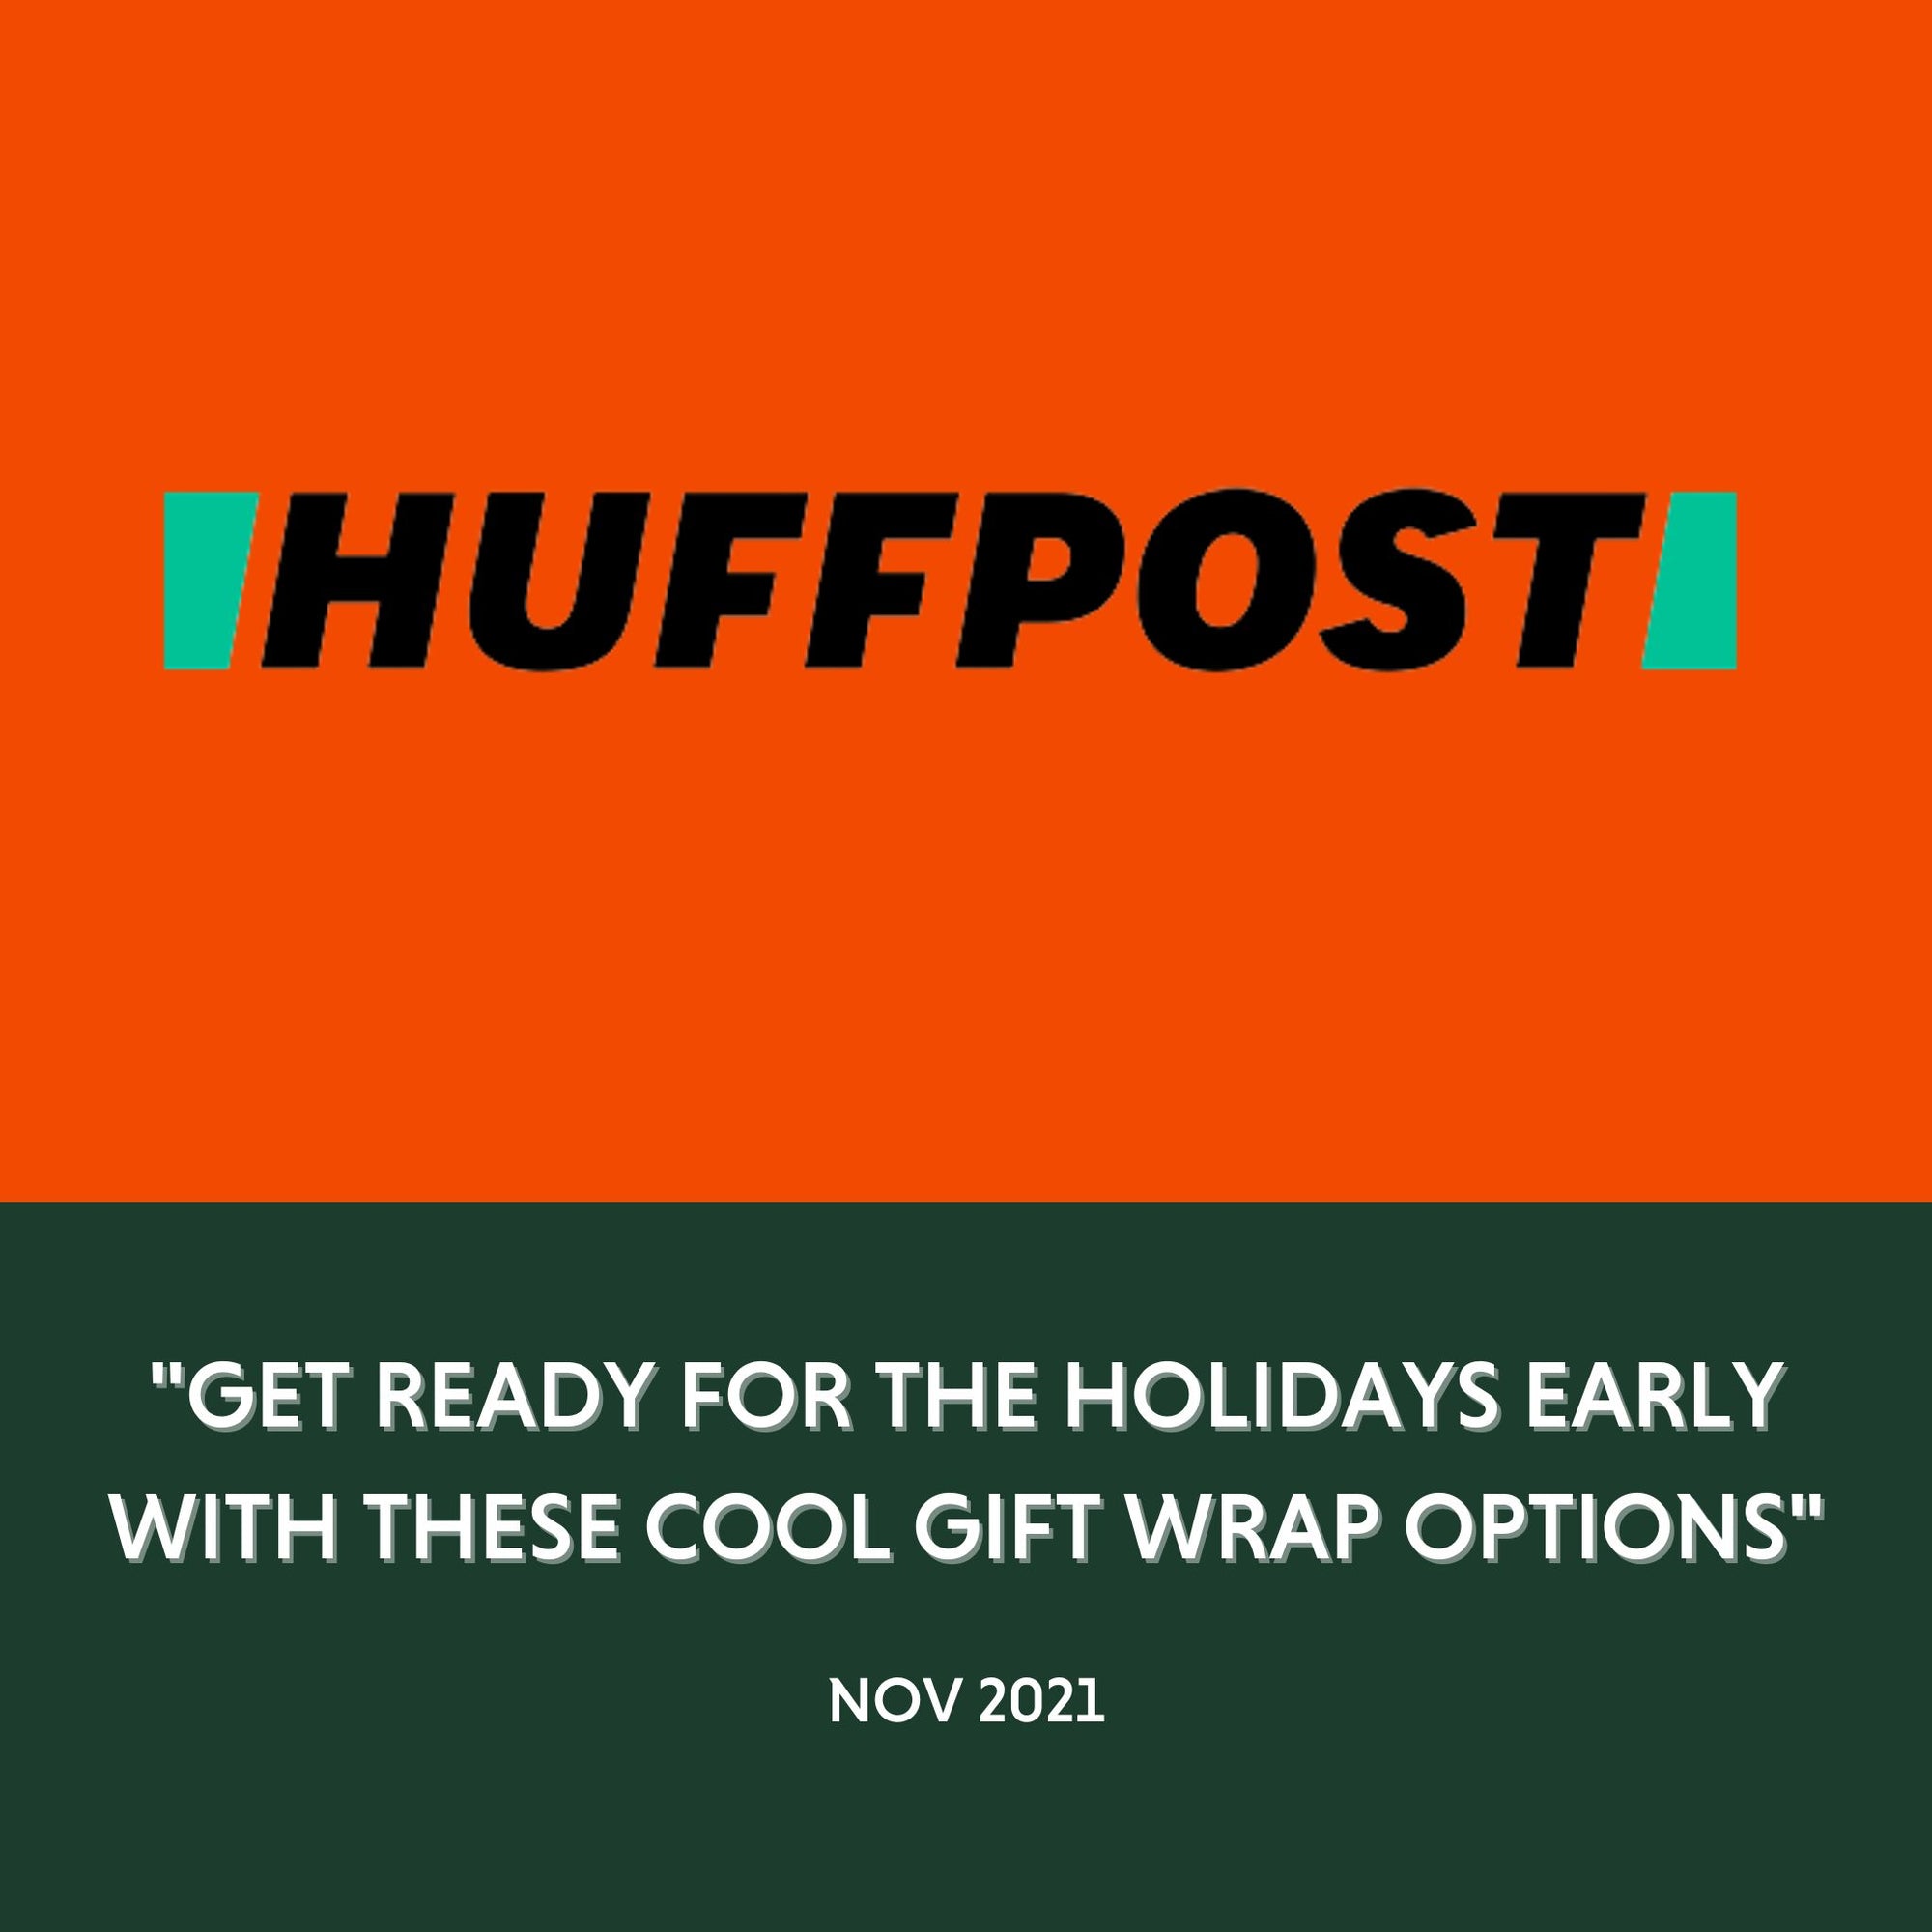 HuffPost - "Get Ready For The Holidays Early With These Cool Gift Wrap Options" - Nov 2021